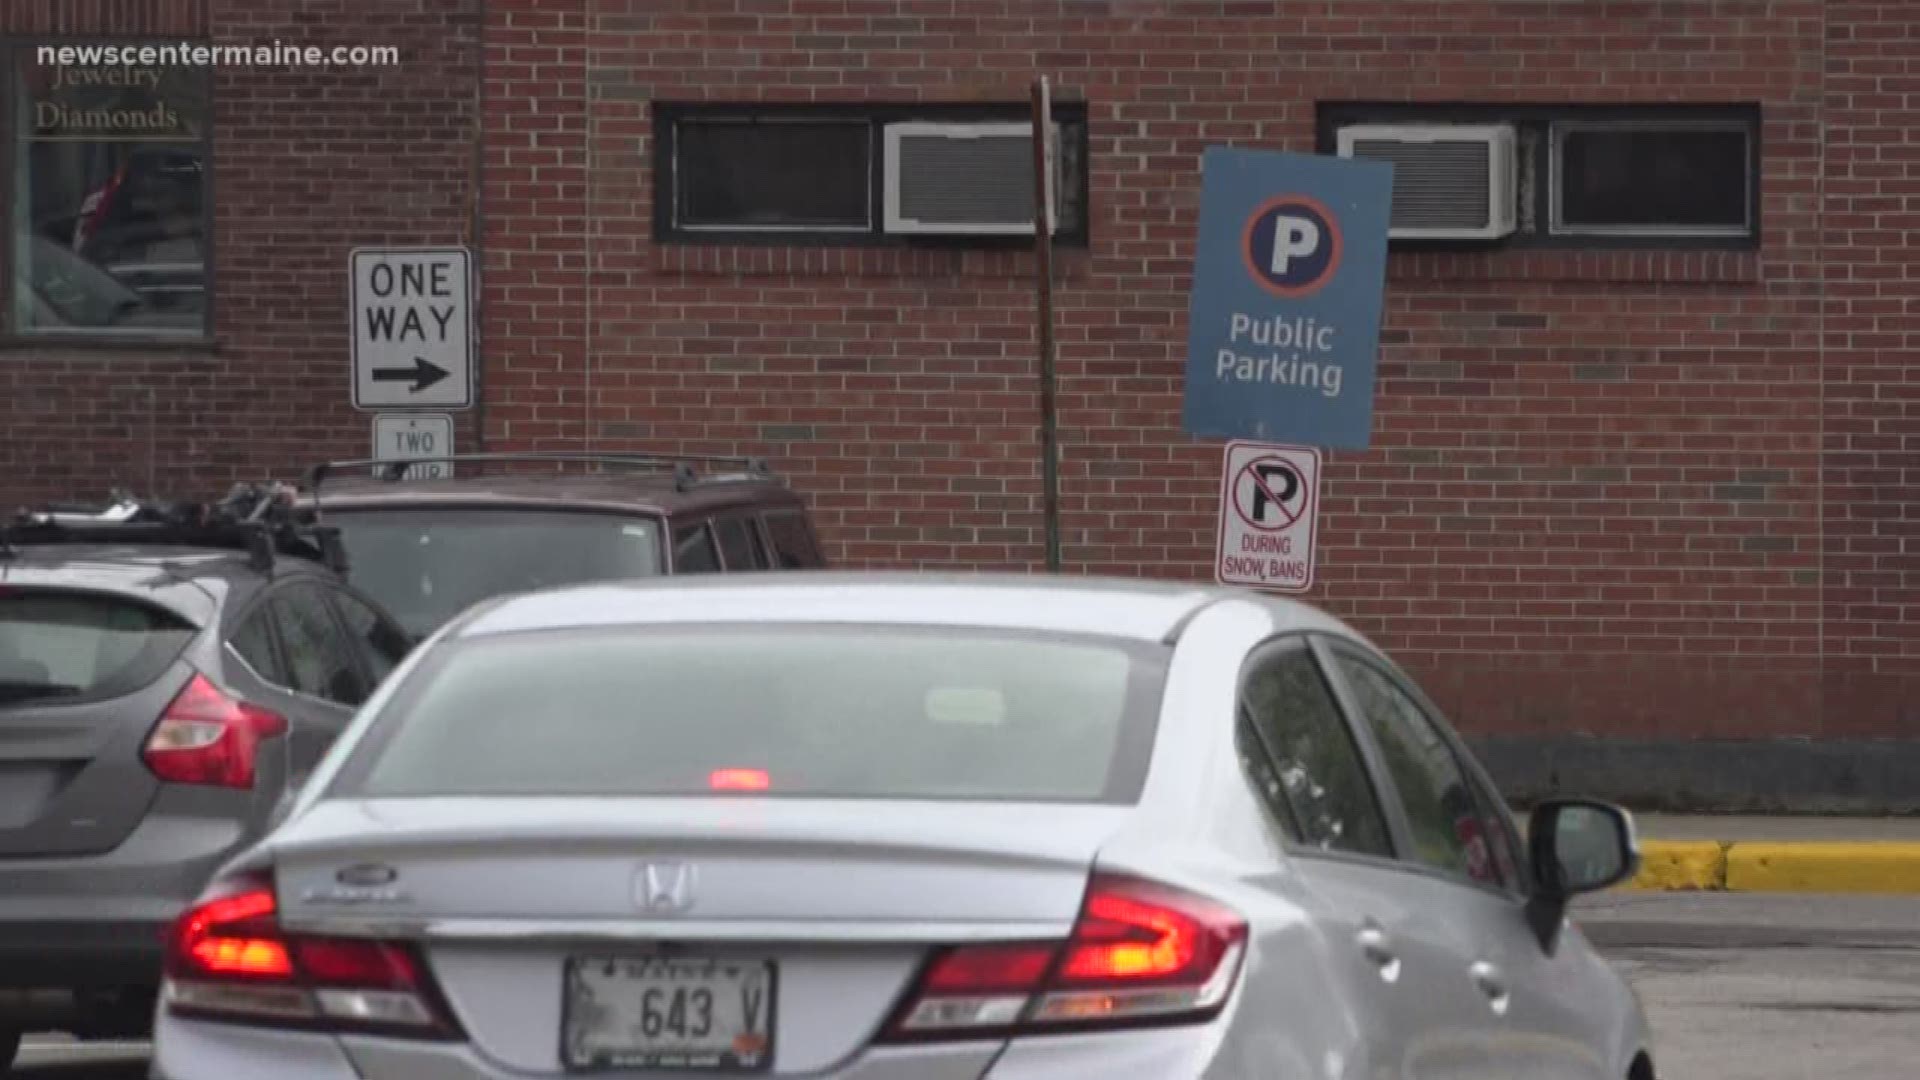 The city of Biddeford is continuing to work toward solutions to establish more parking options.